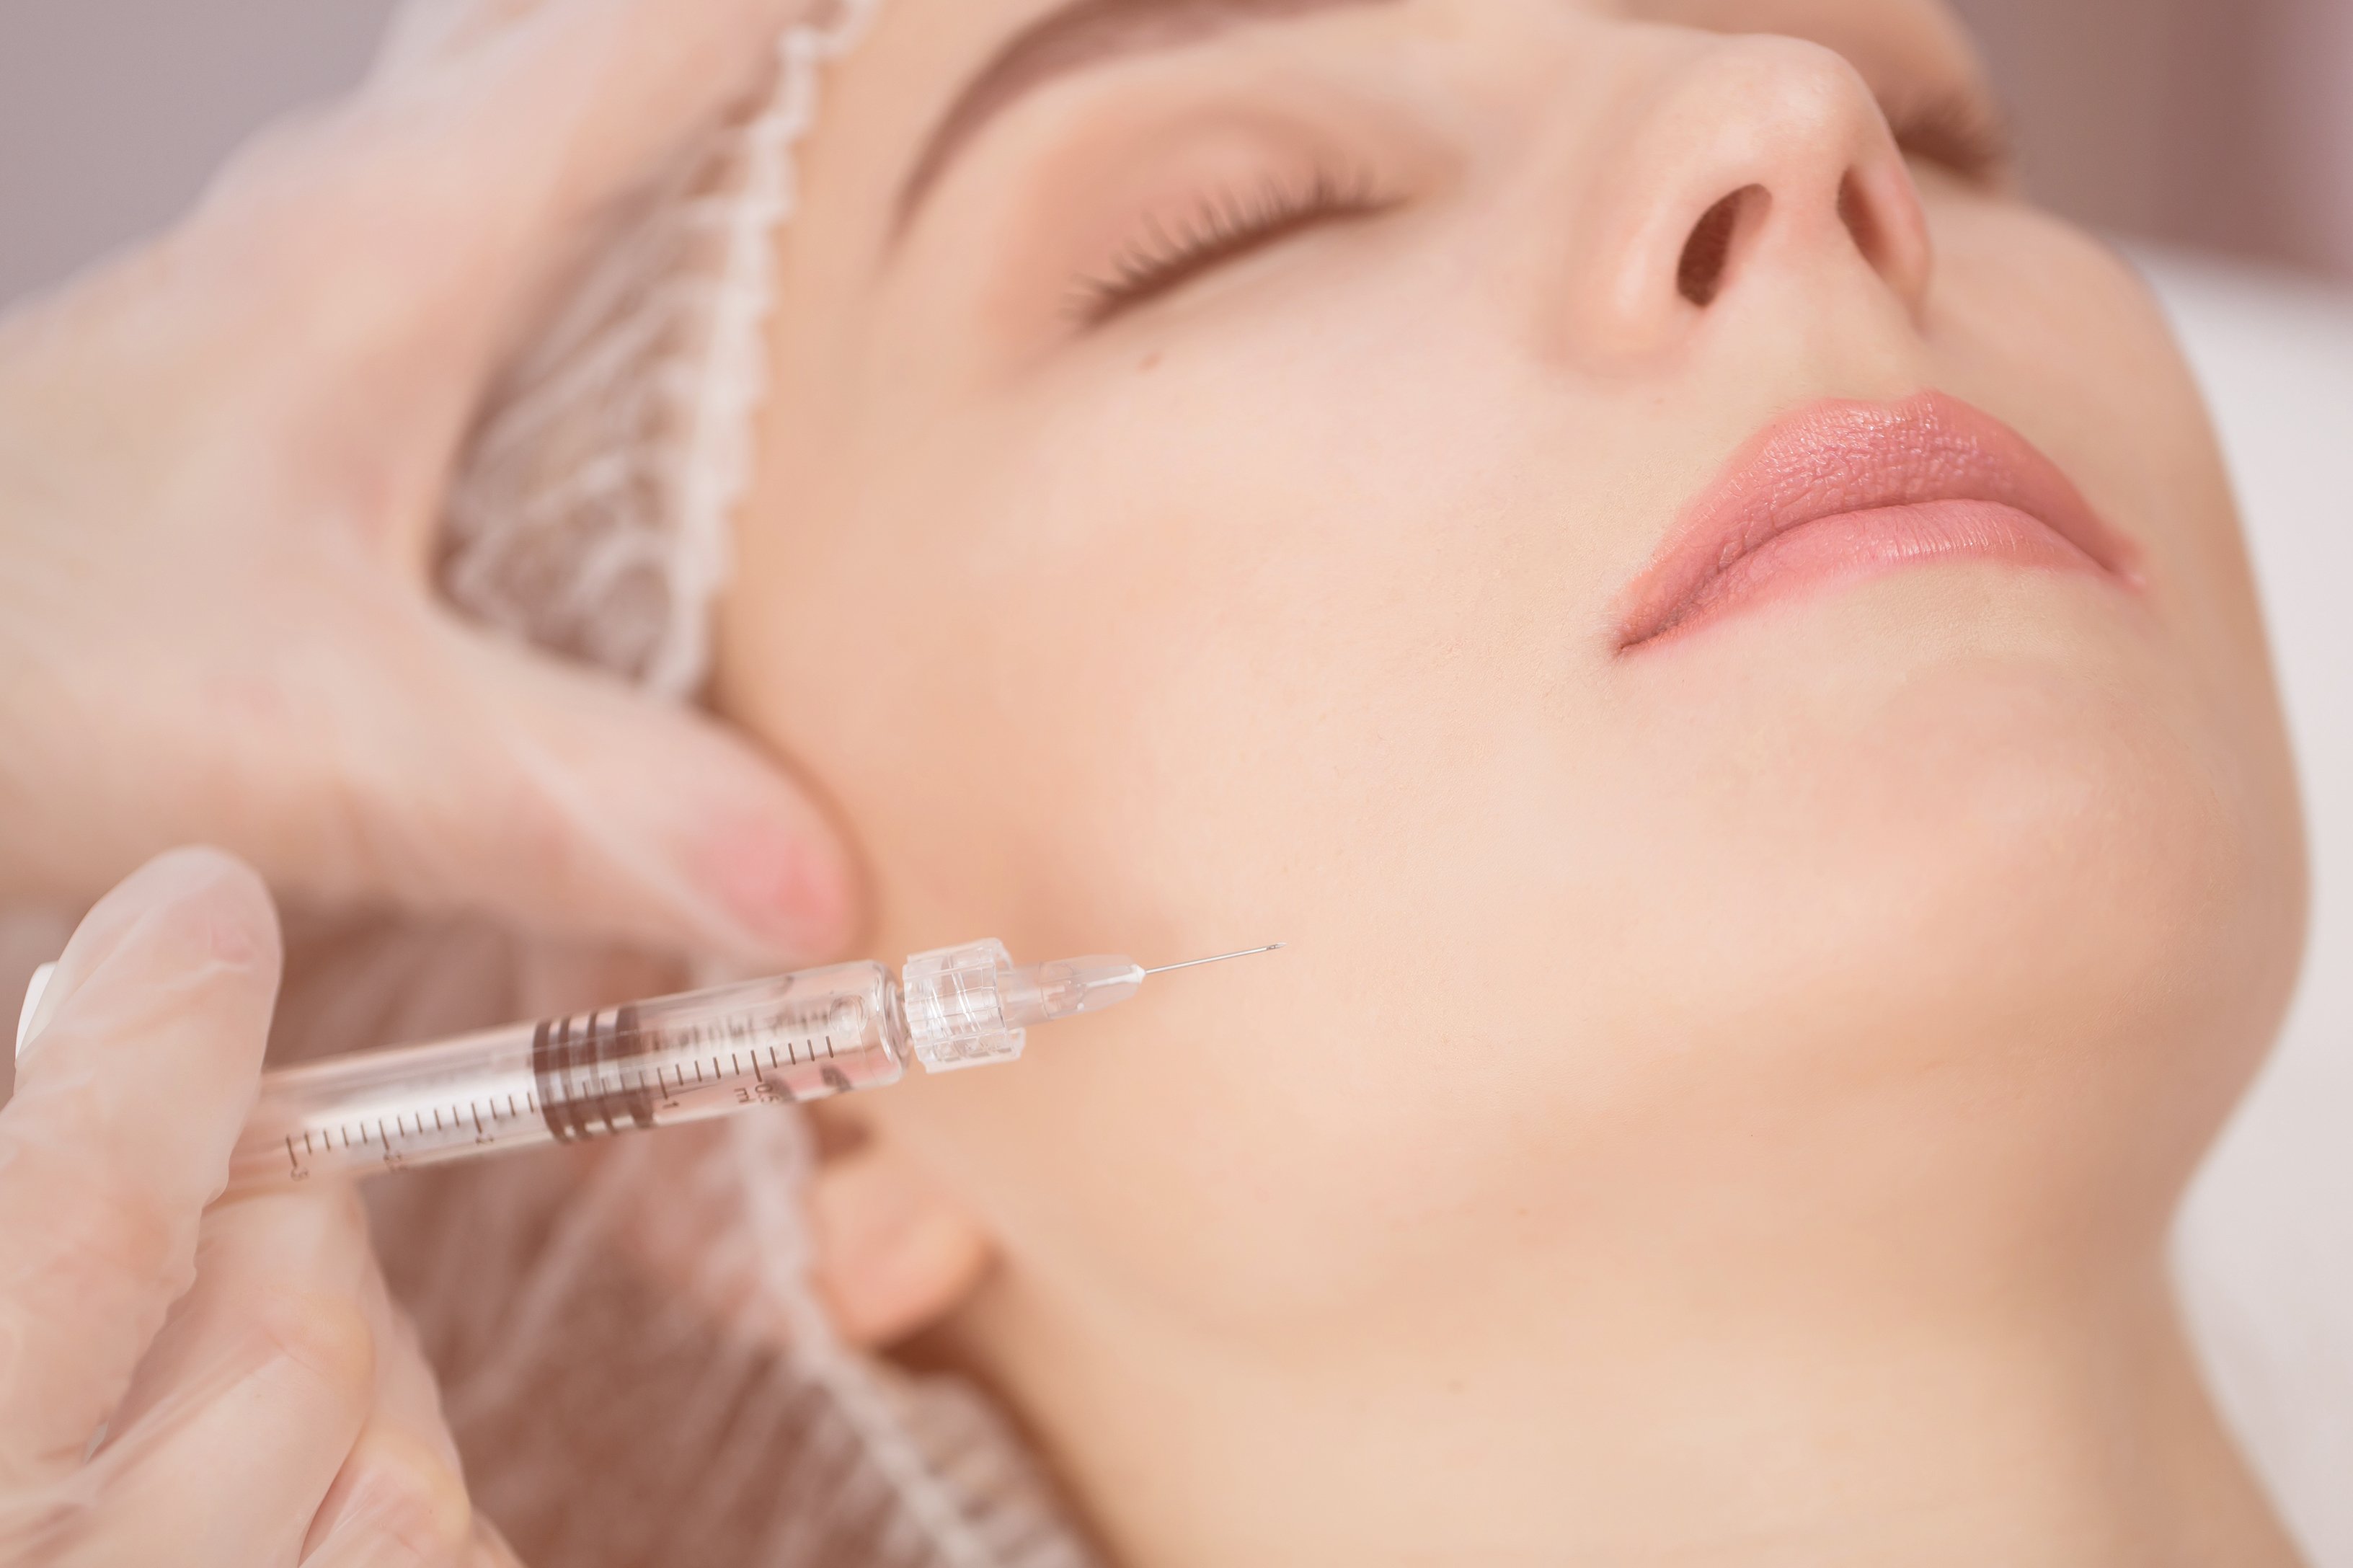 Instant Jaw Pain Relief With Botox - What You Need To Know